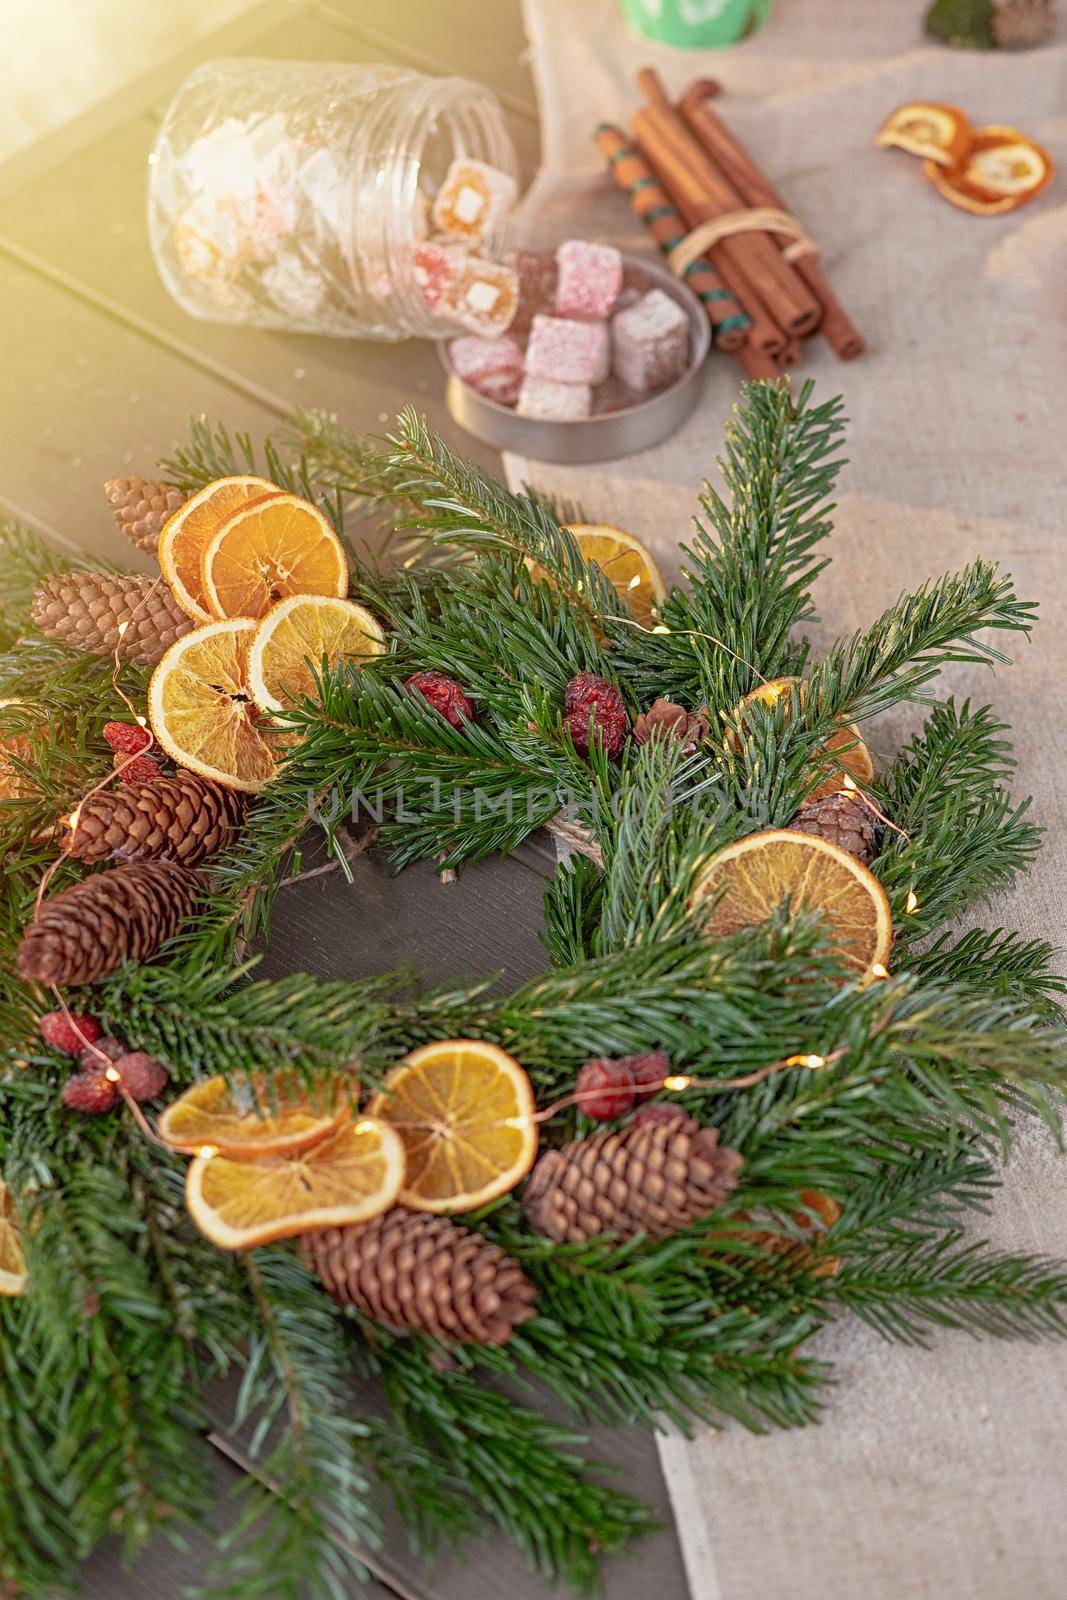 natural spruce wreath on a fabric tablecloth by Zakharova